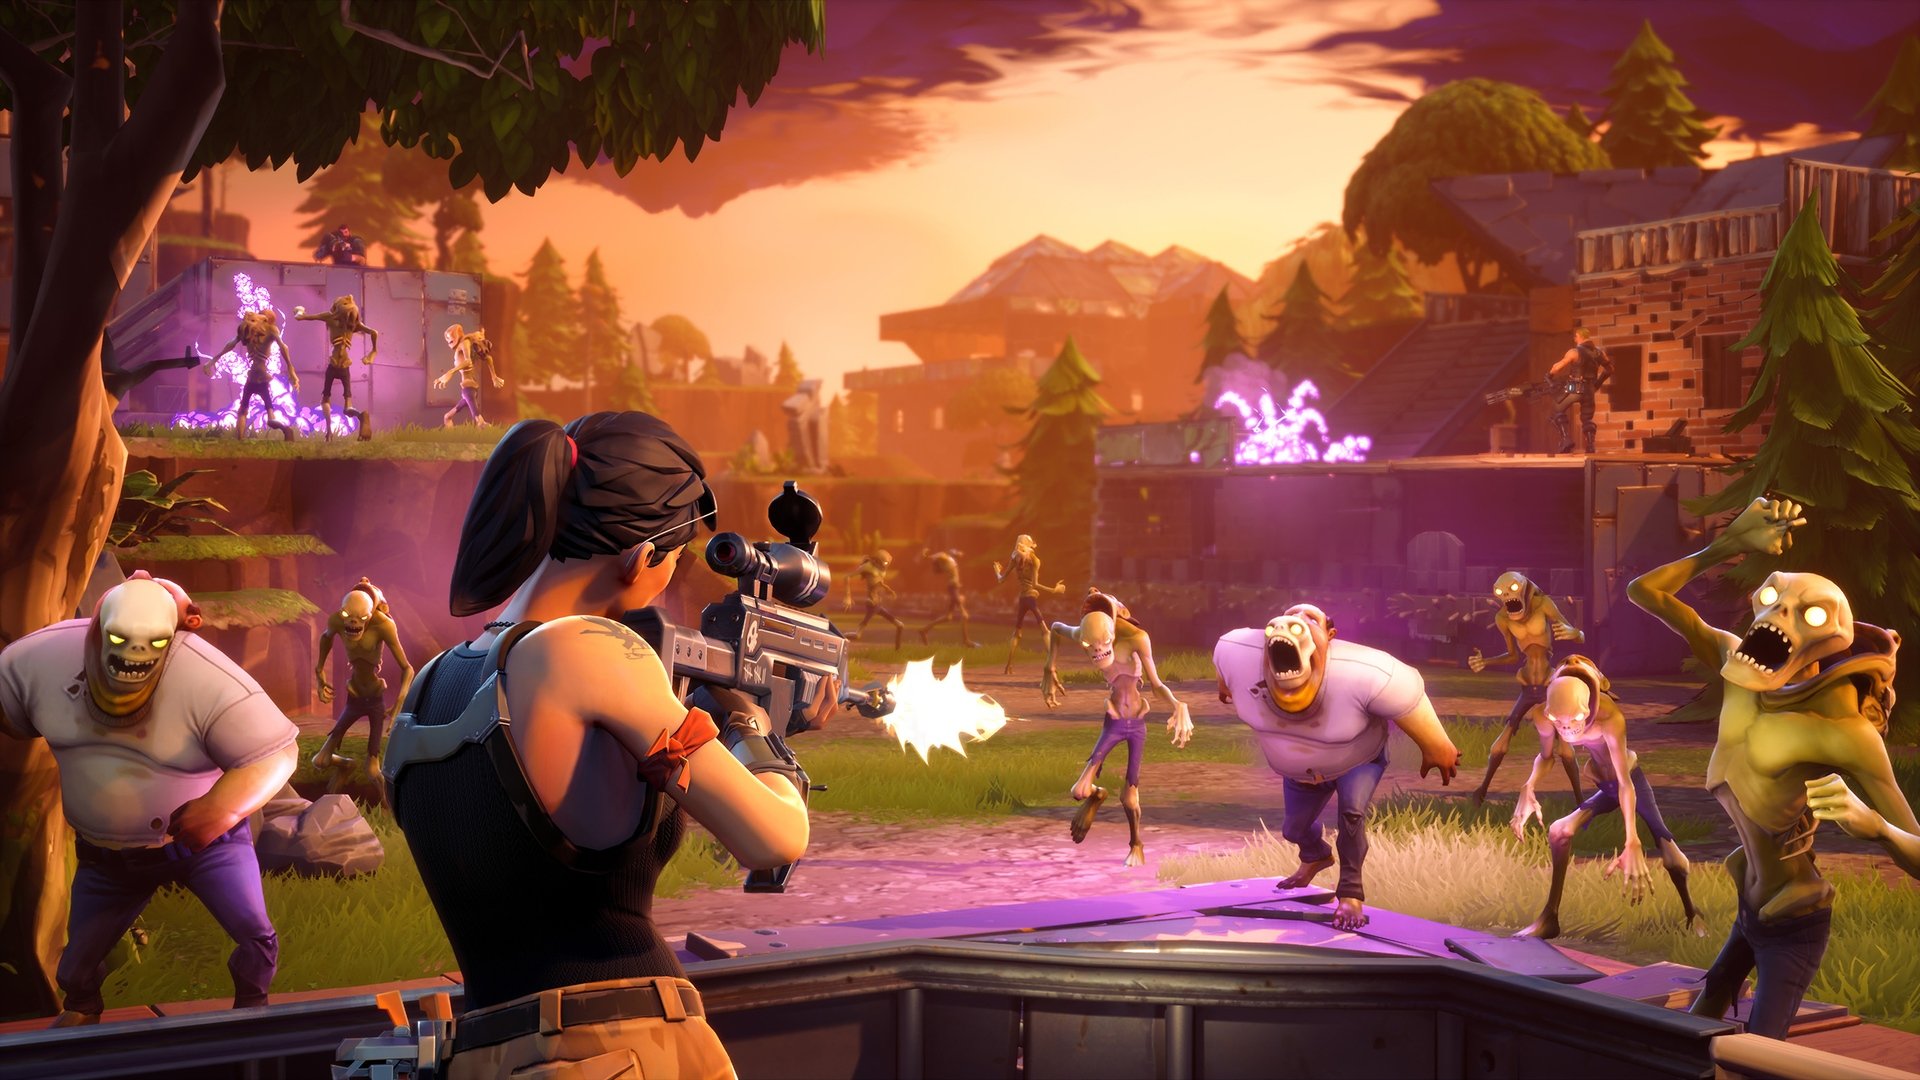 ons comprised of the free to play game eon cosmetic bundle and in game currency however with fortnite s paid save the world component excluded - fortnite eon bundle code free